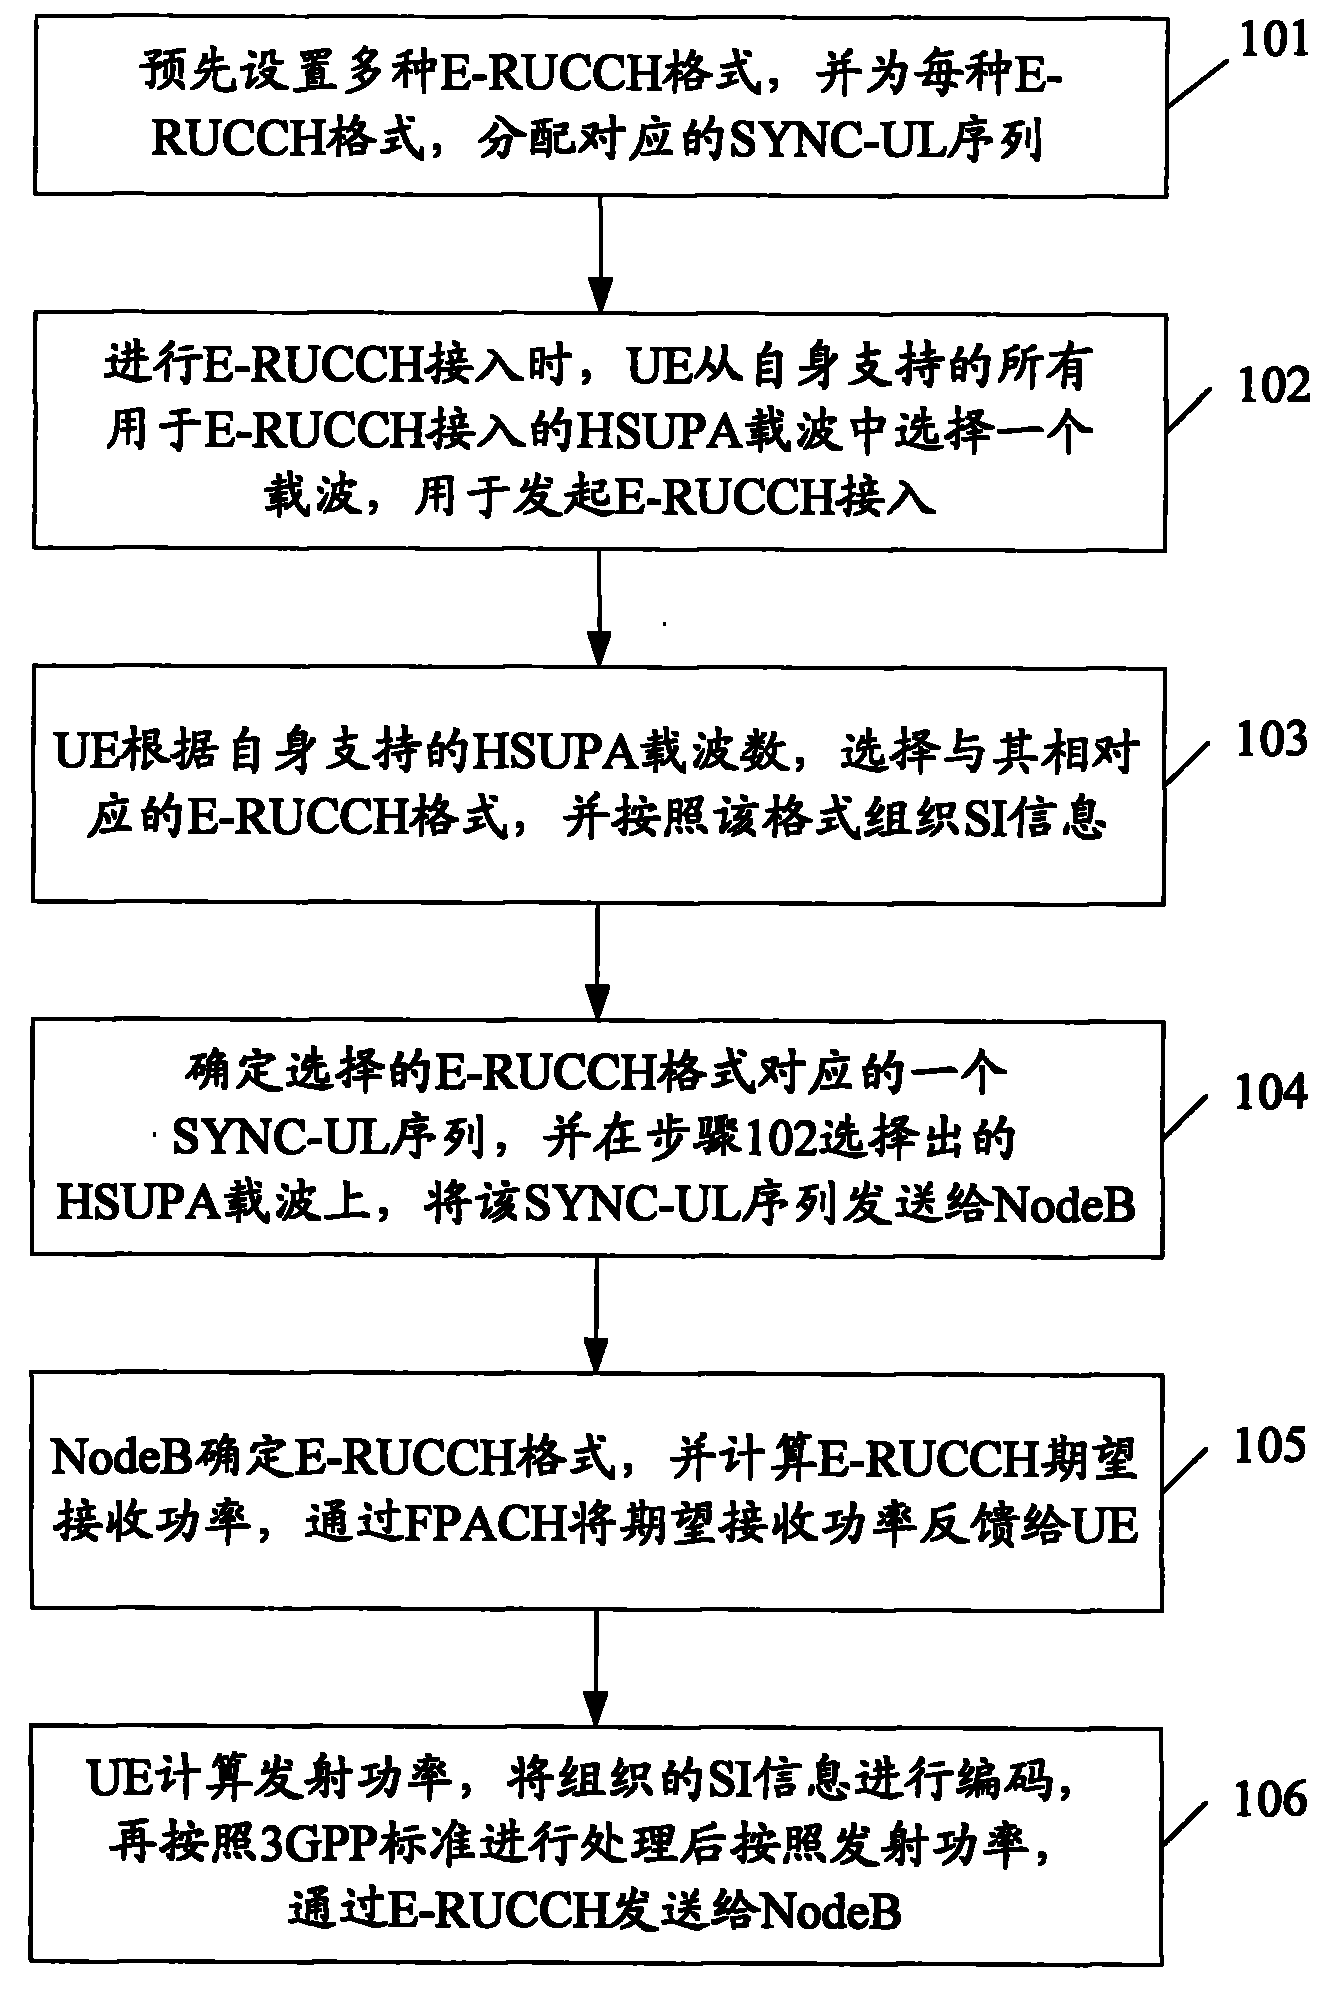 E-RUCCH (Enhanced-Random-Access Uplink Control Channel) data transmission method in multi-carrier HSUPA (High Speed Uplink Packet Access) system